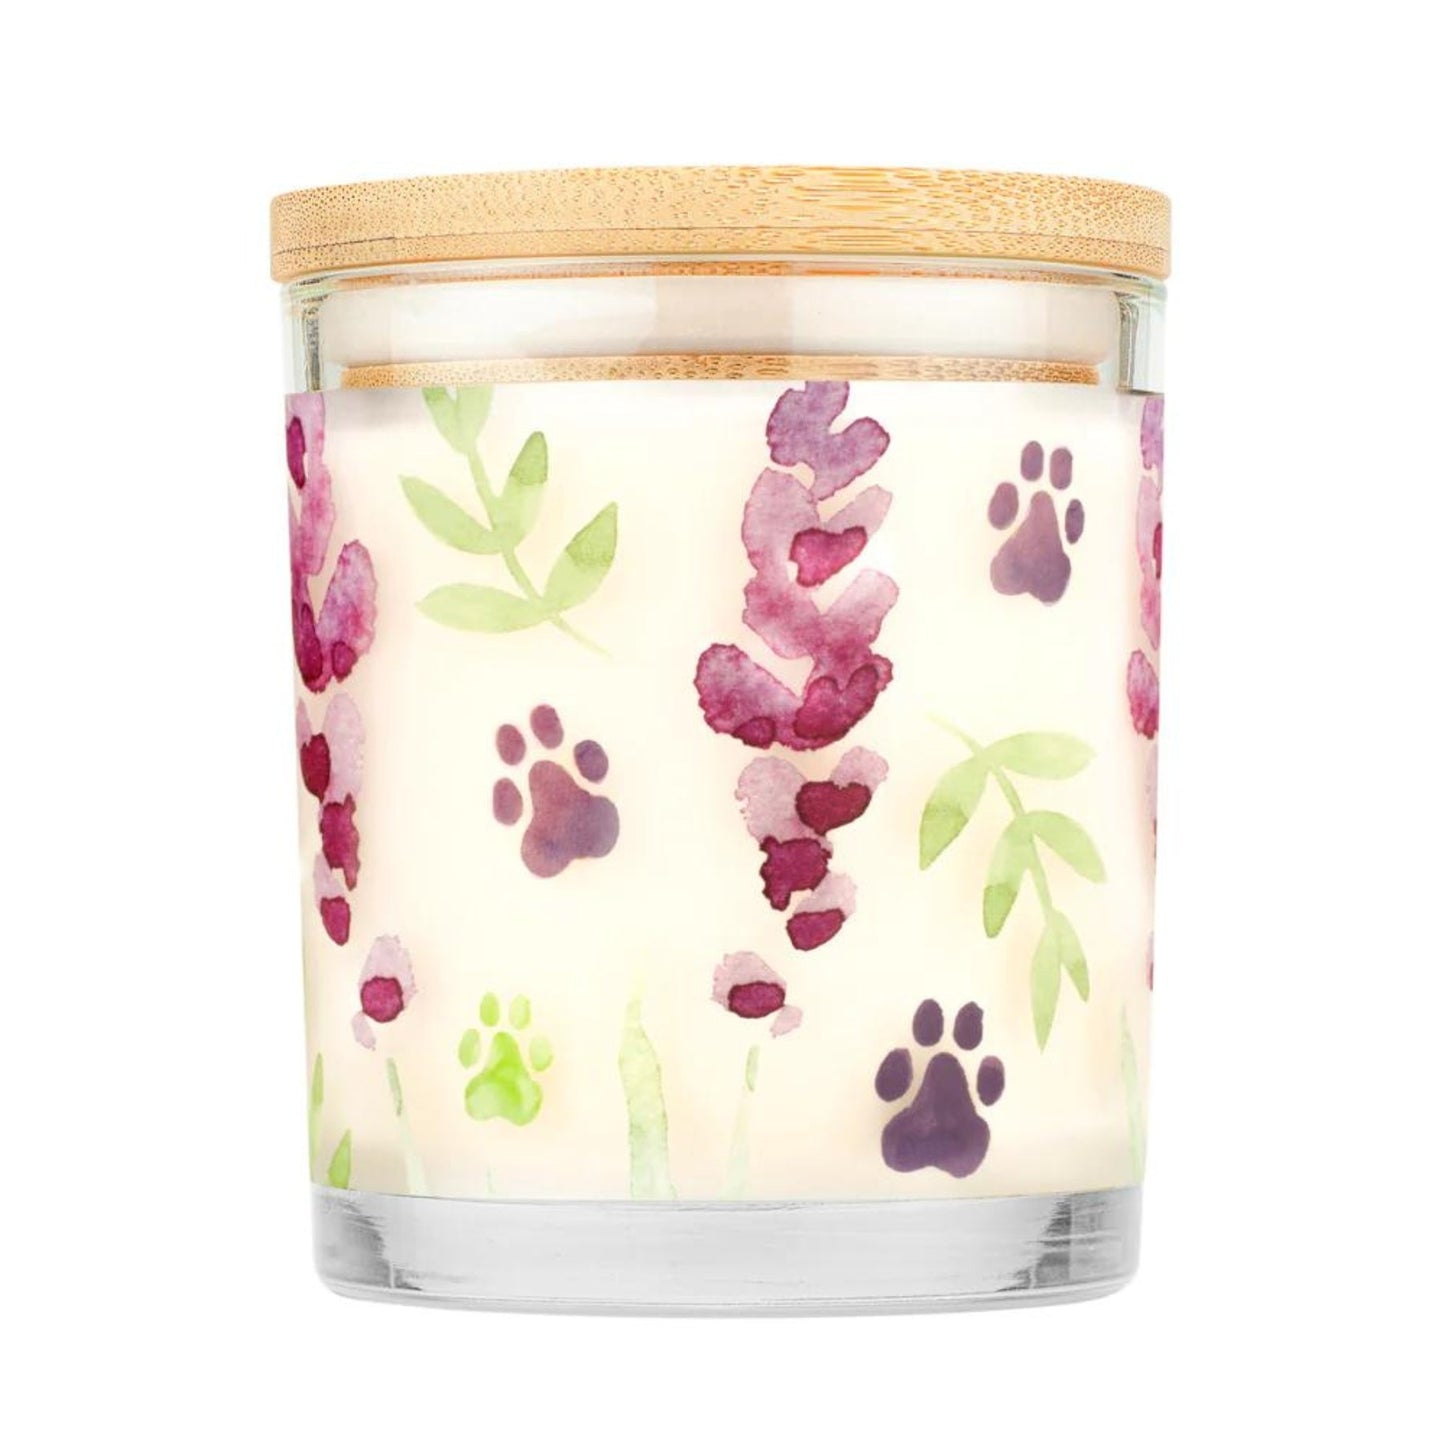 One Fur All Pet House Candle - Lavender Green Tea - Pooch Luxury